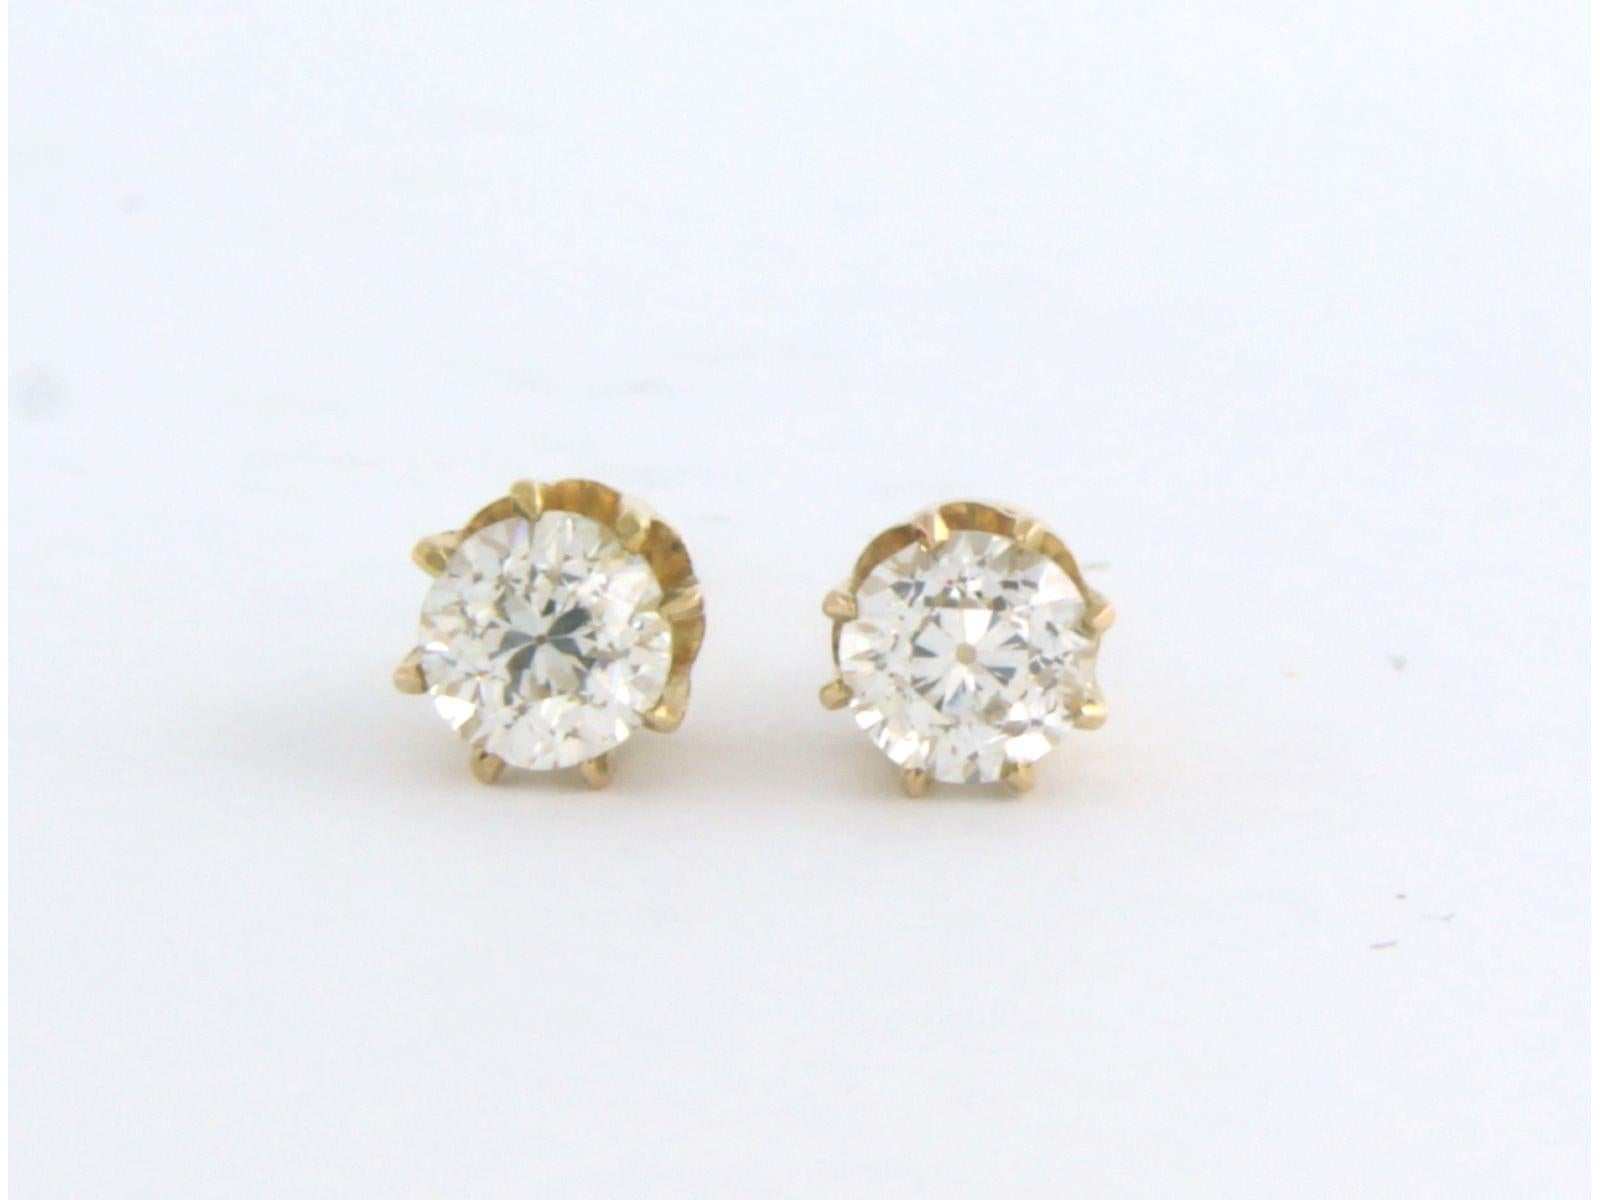 14 kt yellow gold ear studs set with old European cut diamond to. 0.76 ct - G/H - VS/SI

Detailed description:

the top of the ear stud is 5.4 mm wide

weight 2.2 grams

put with

- 2 x 4.3 mm old European cut diamond, approx. 0.76 carats in